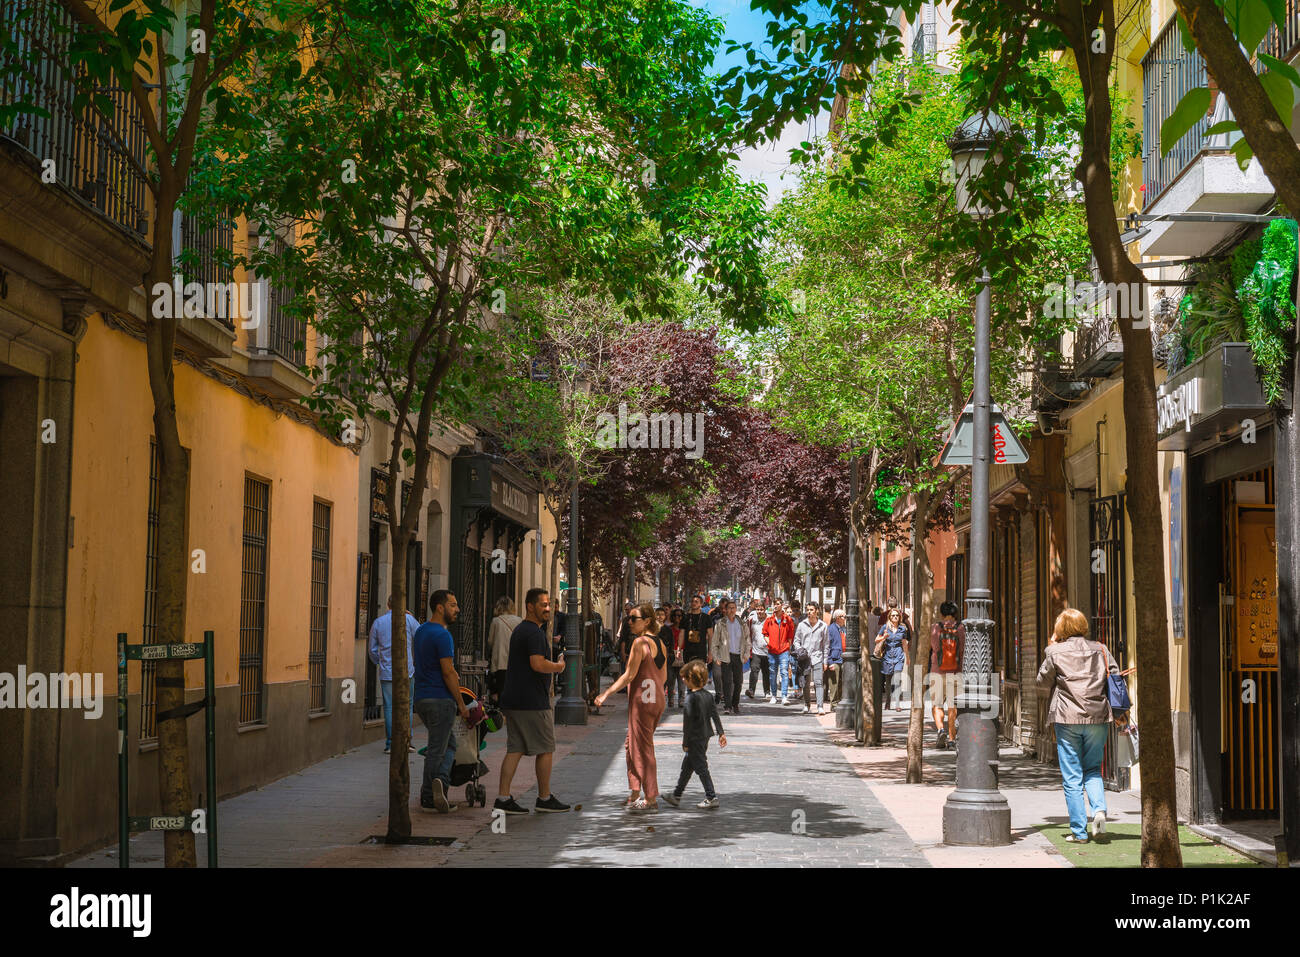 Madrid Huertas street, view in summer of a typical tree lined street in the historic Huertas district of Madrid, Spain. Stock Photo